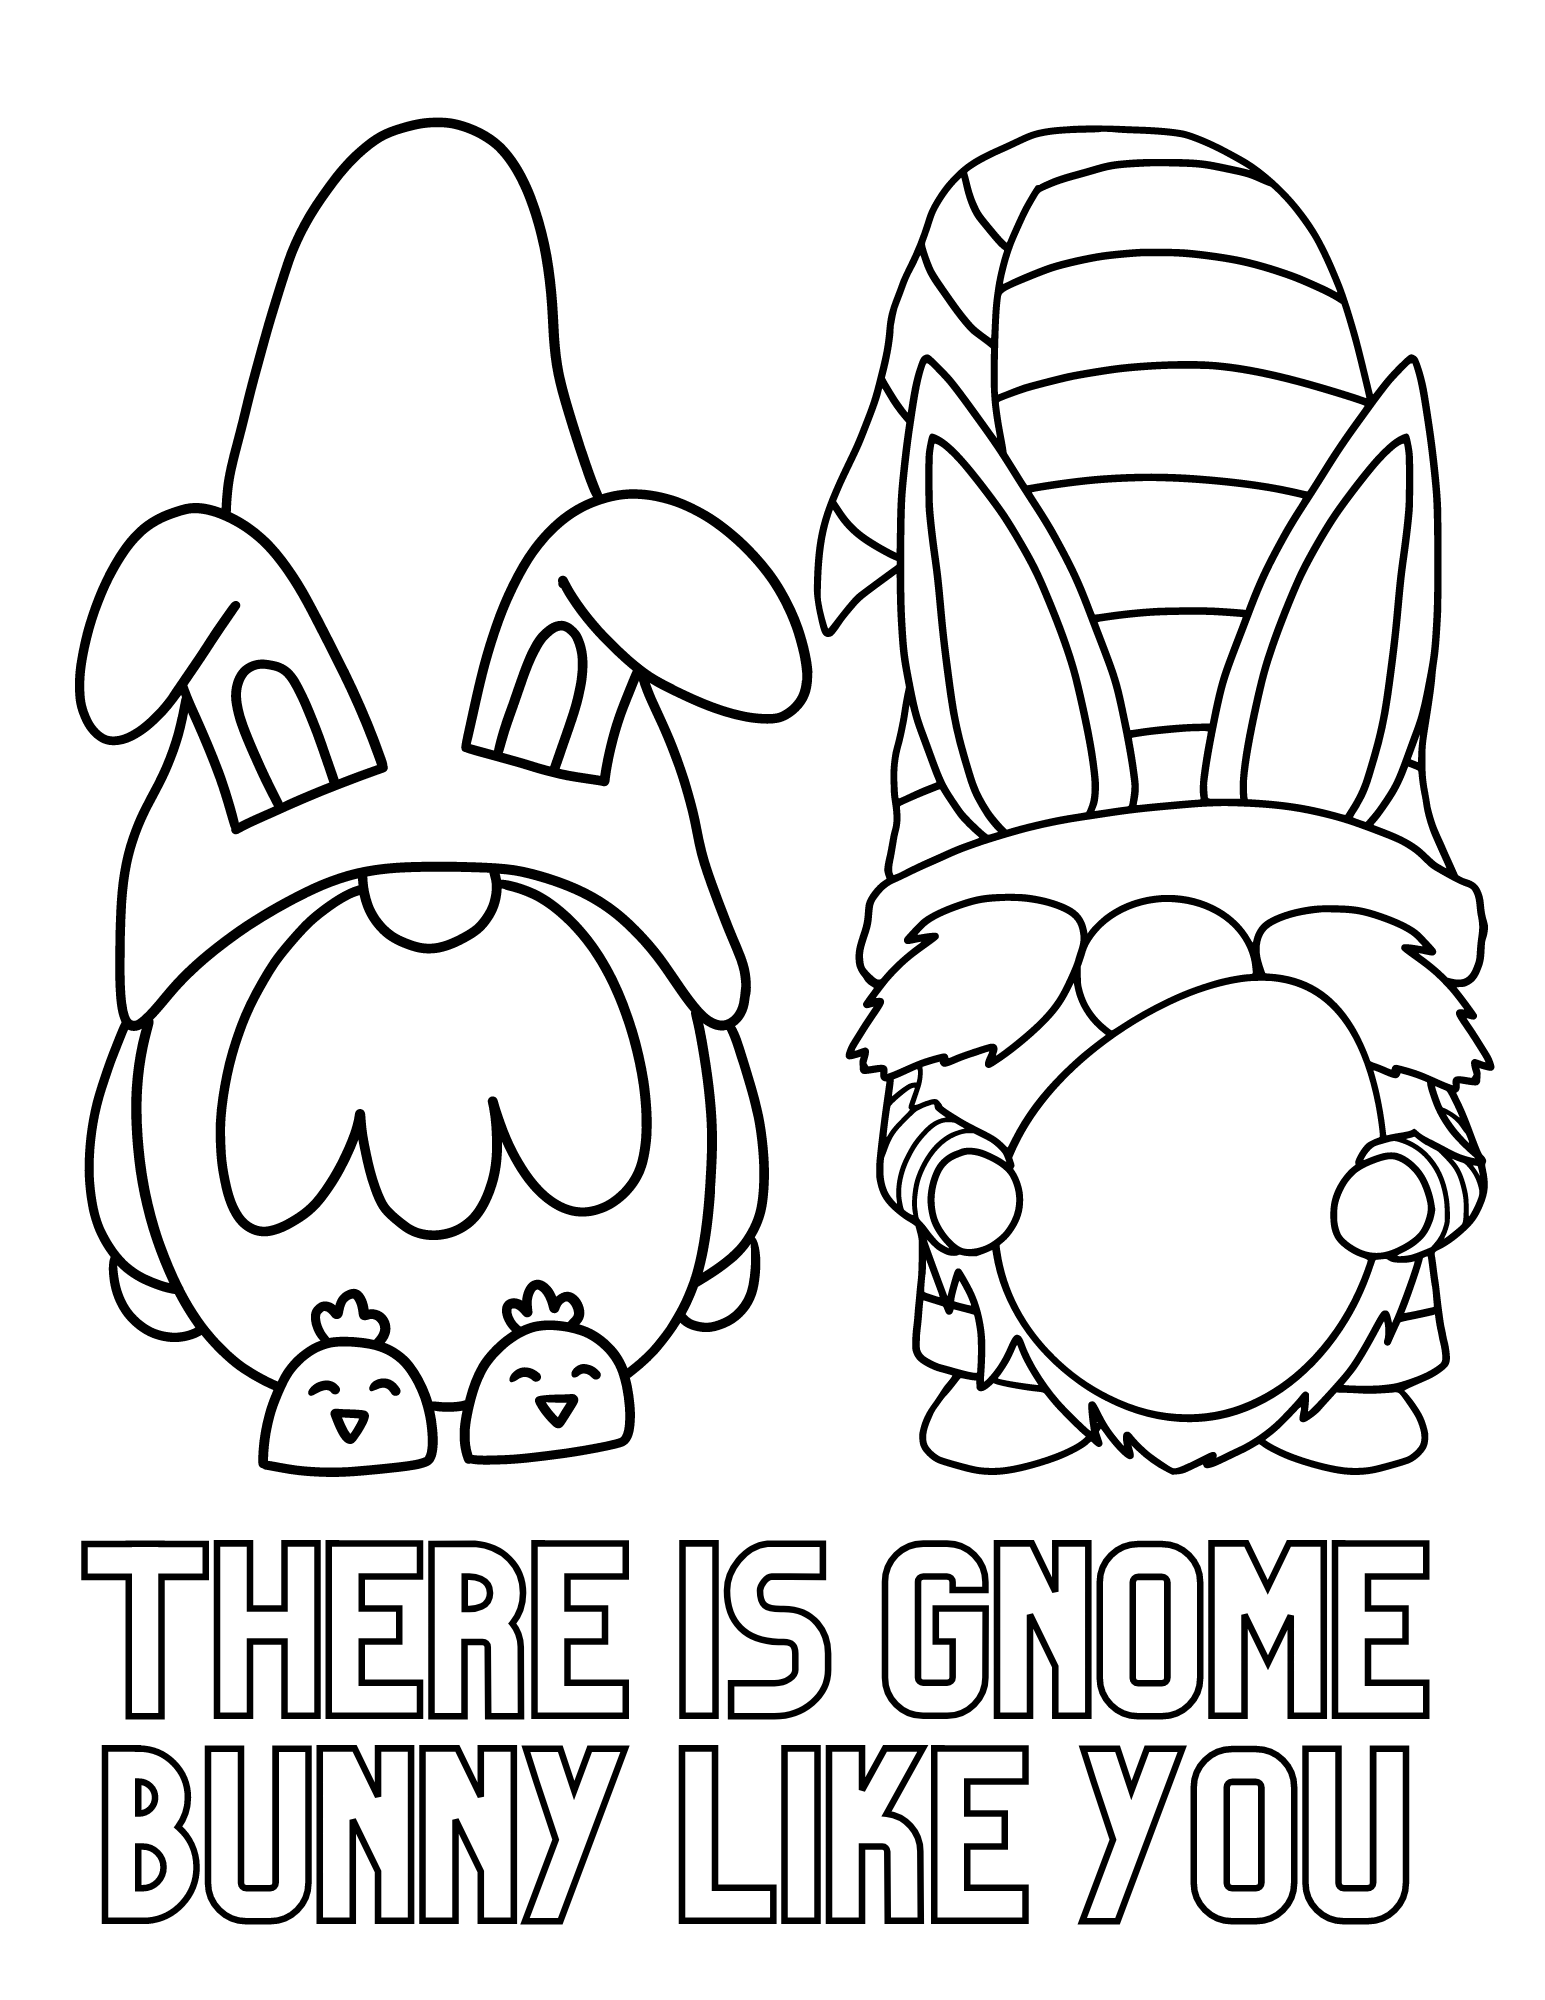 Free printable easter gnomes coloring pages for kids and adults